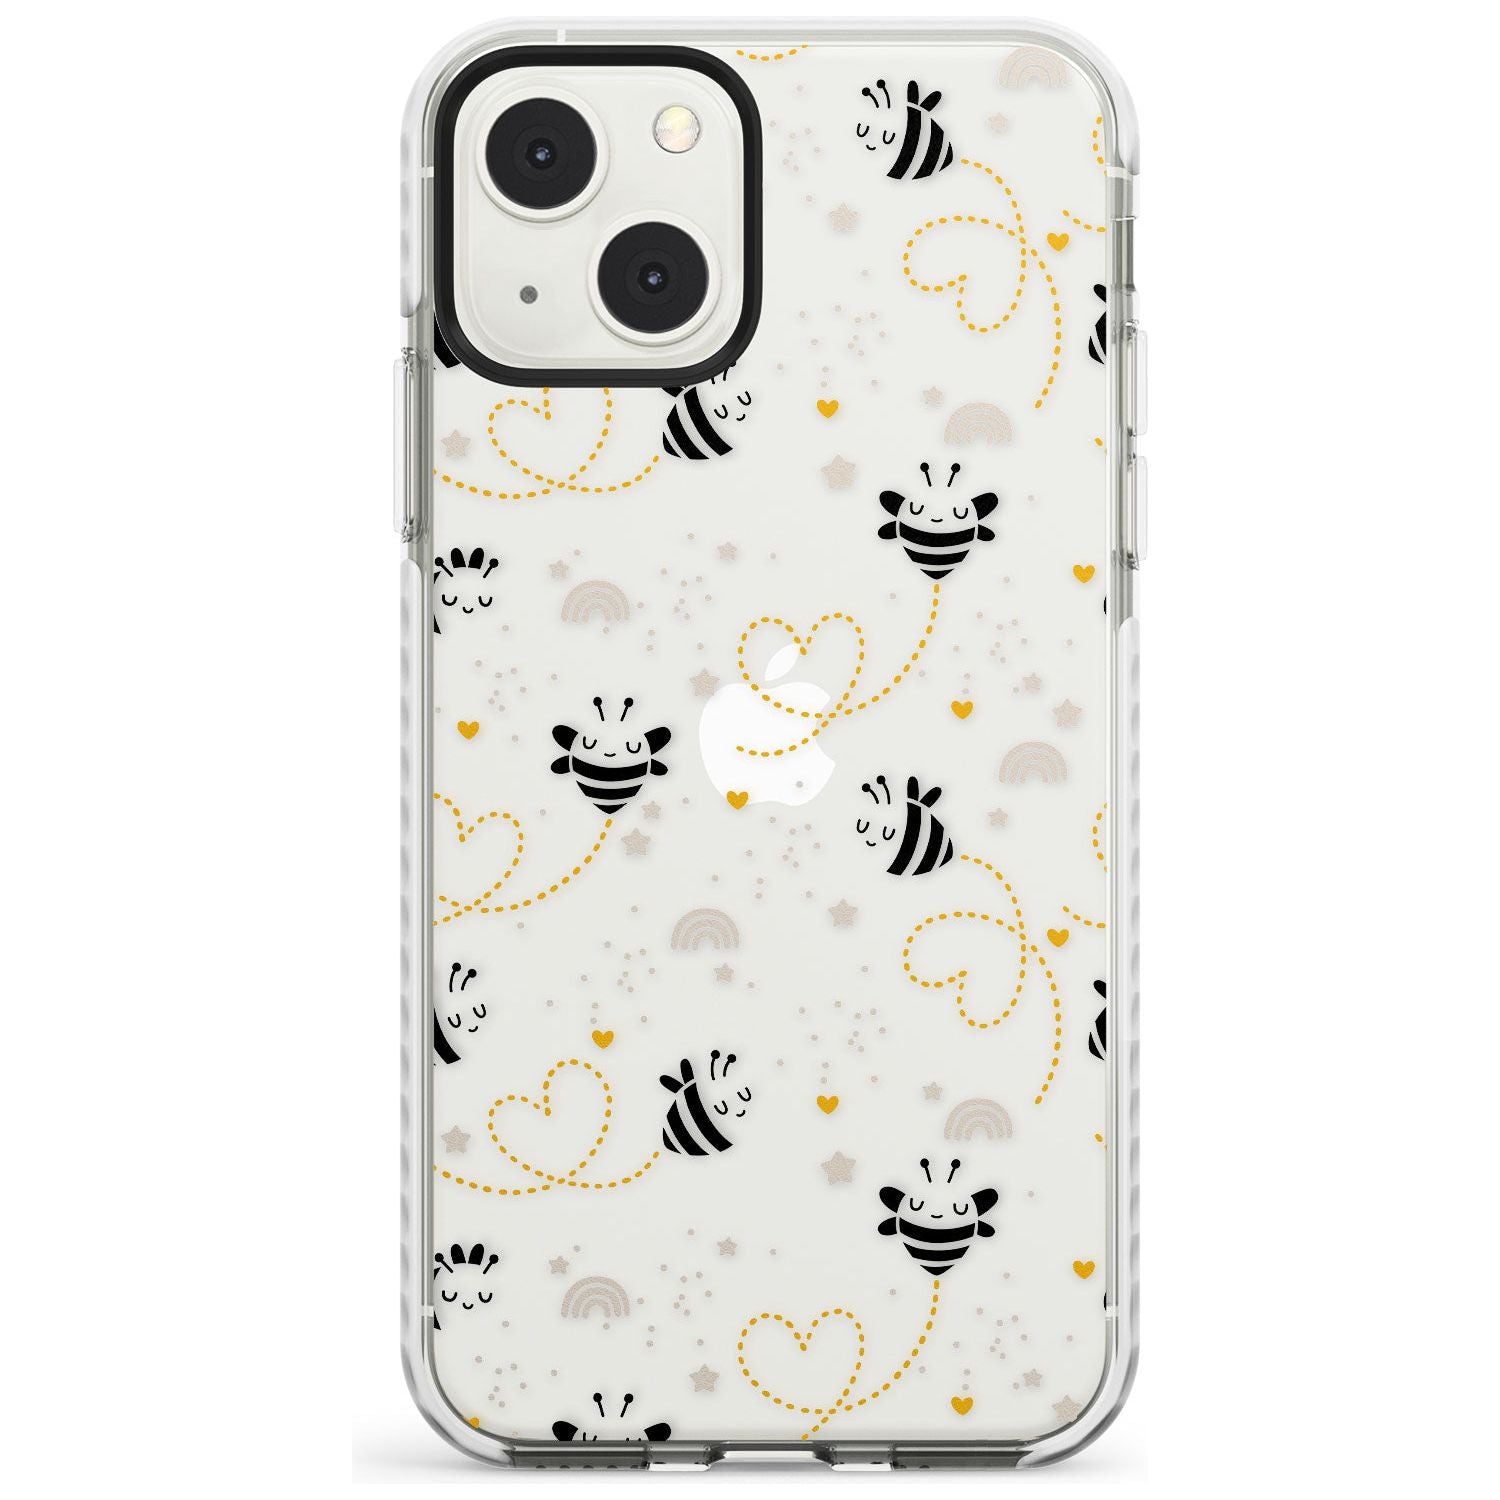 Sweet as Honey Patterns: Bees & Hearts (Clear)